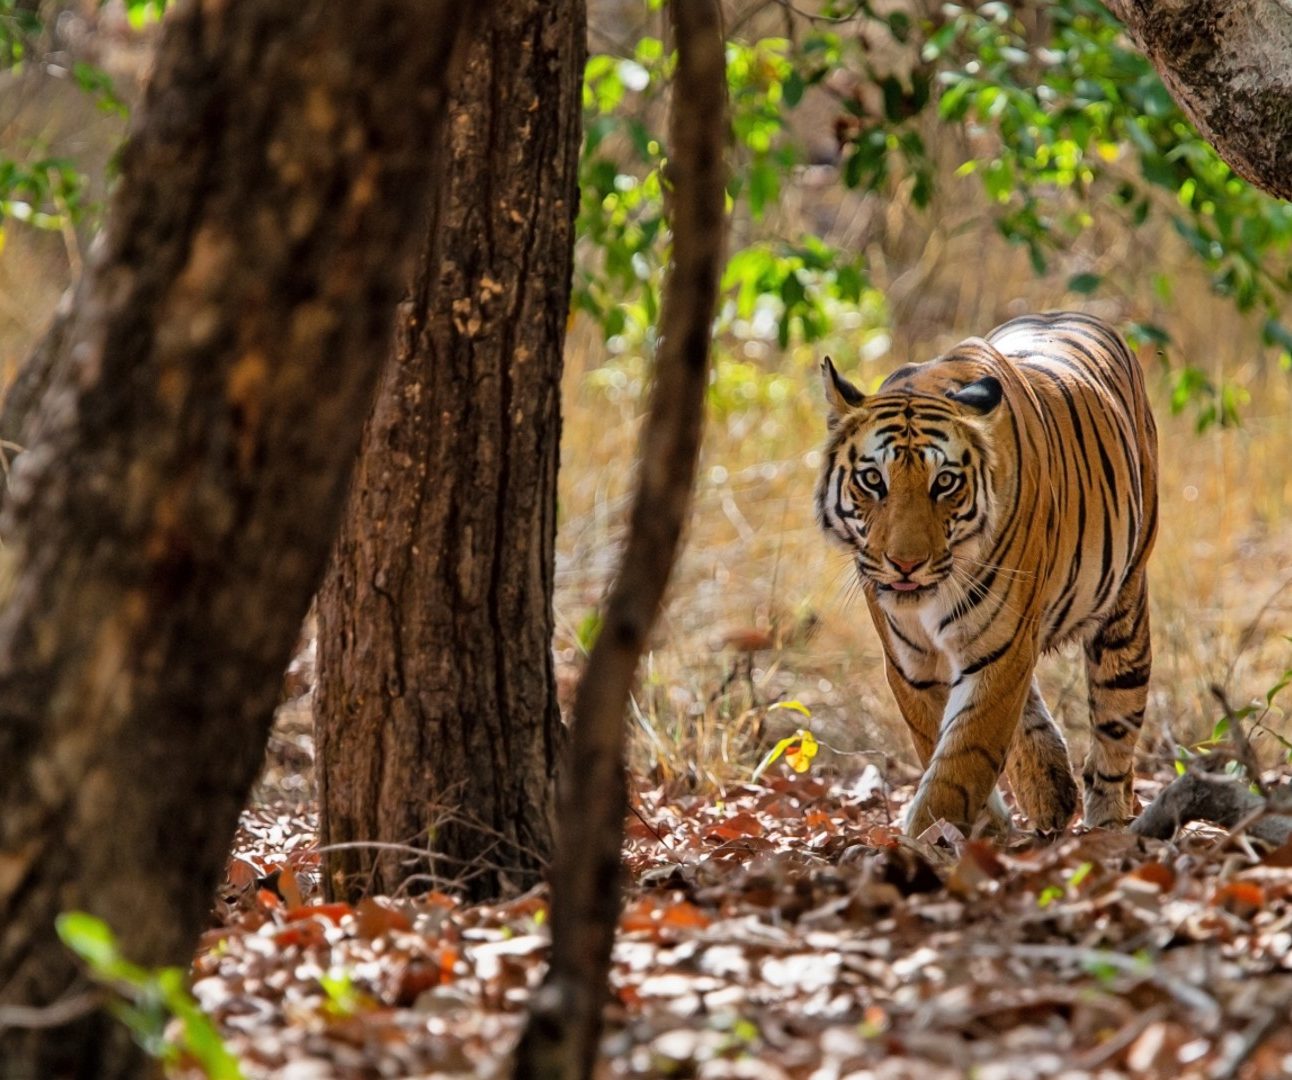 A tiger walking through the forest